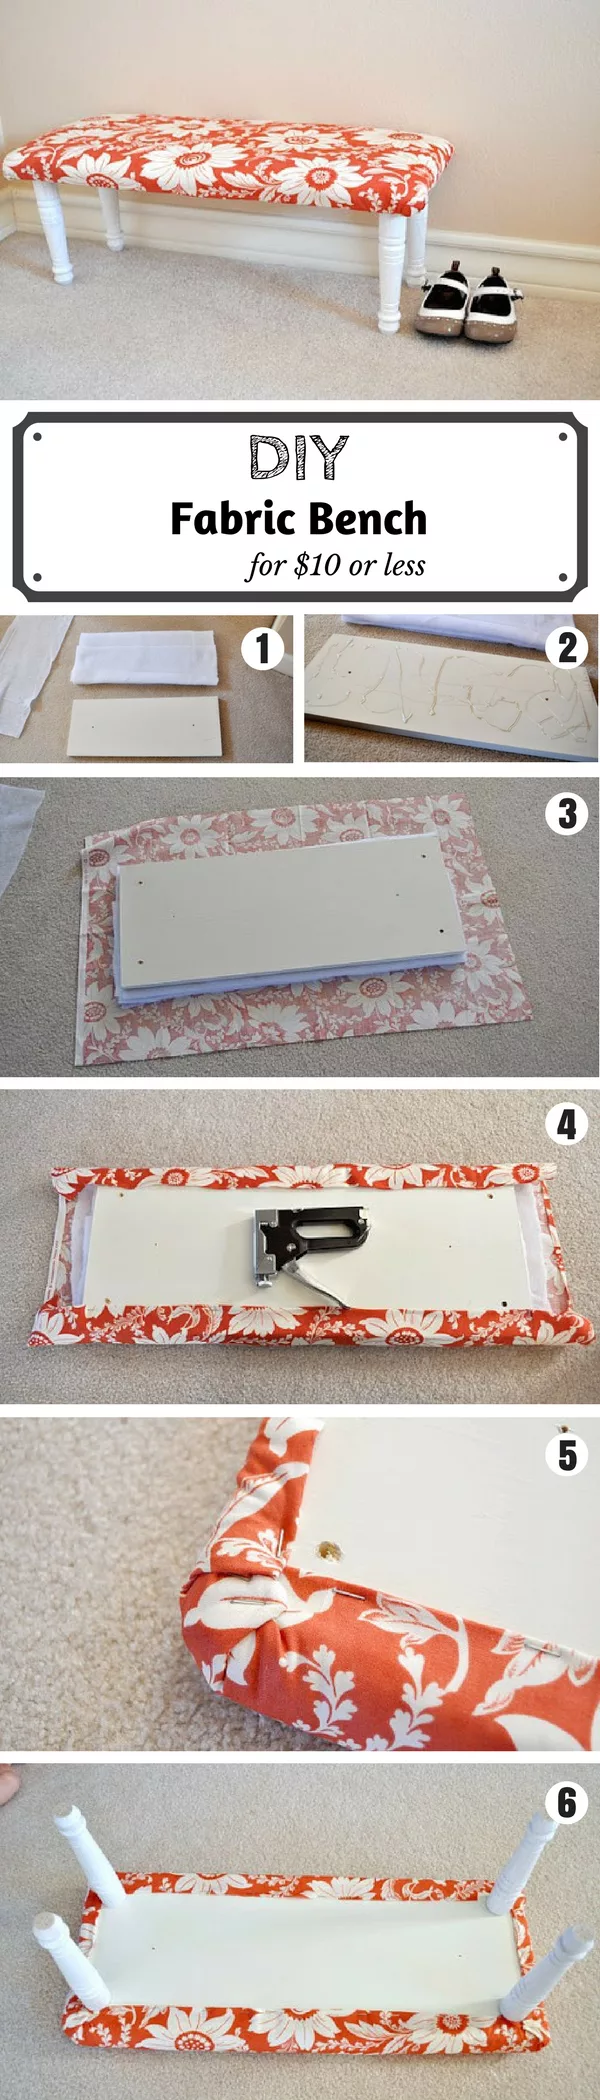 Check out the tutorial on how to make an easy DIY fabric bench